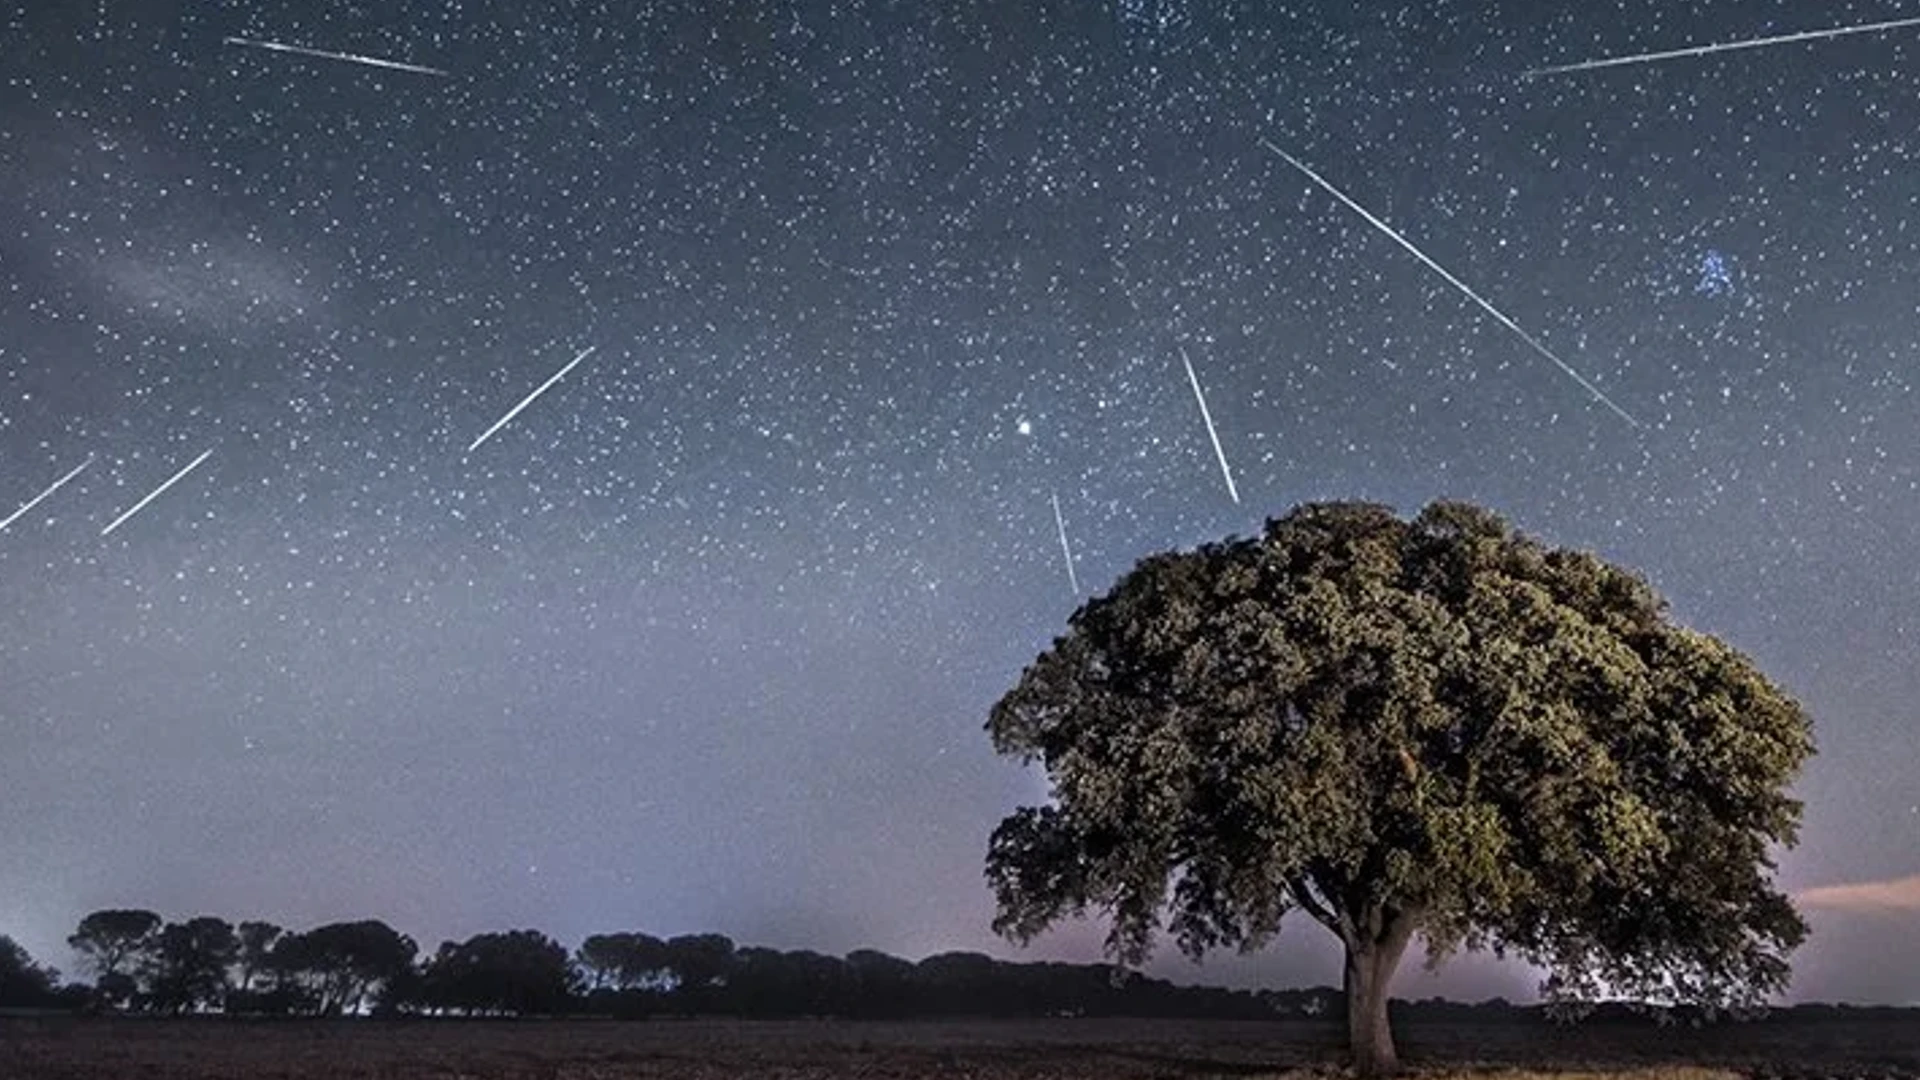 Two Meteor’s Showers Will Take Place On May 5th And May 30th, Here’s What You Need To Know